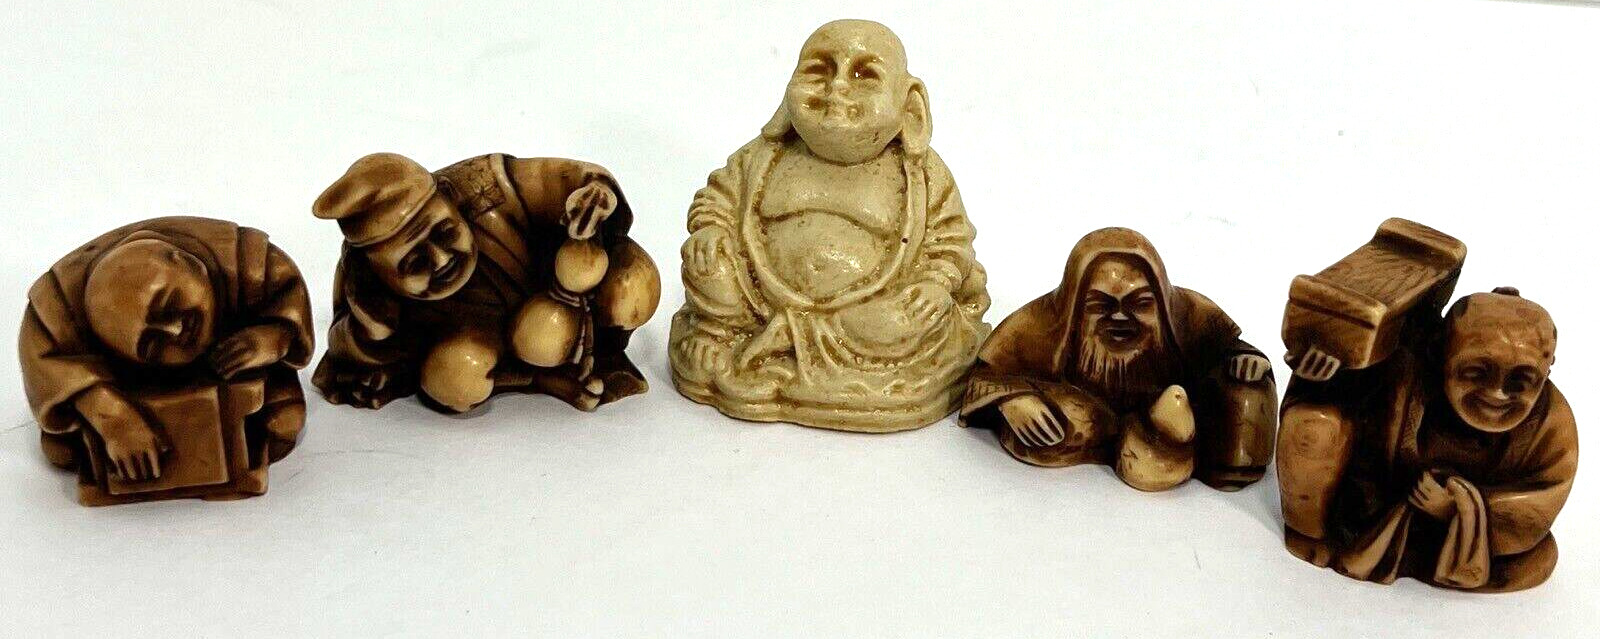 5 pc lot Netsuke handcrafted Italy, Mexico Buddha 1950s natural material figures